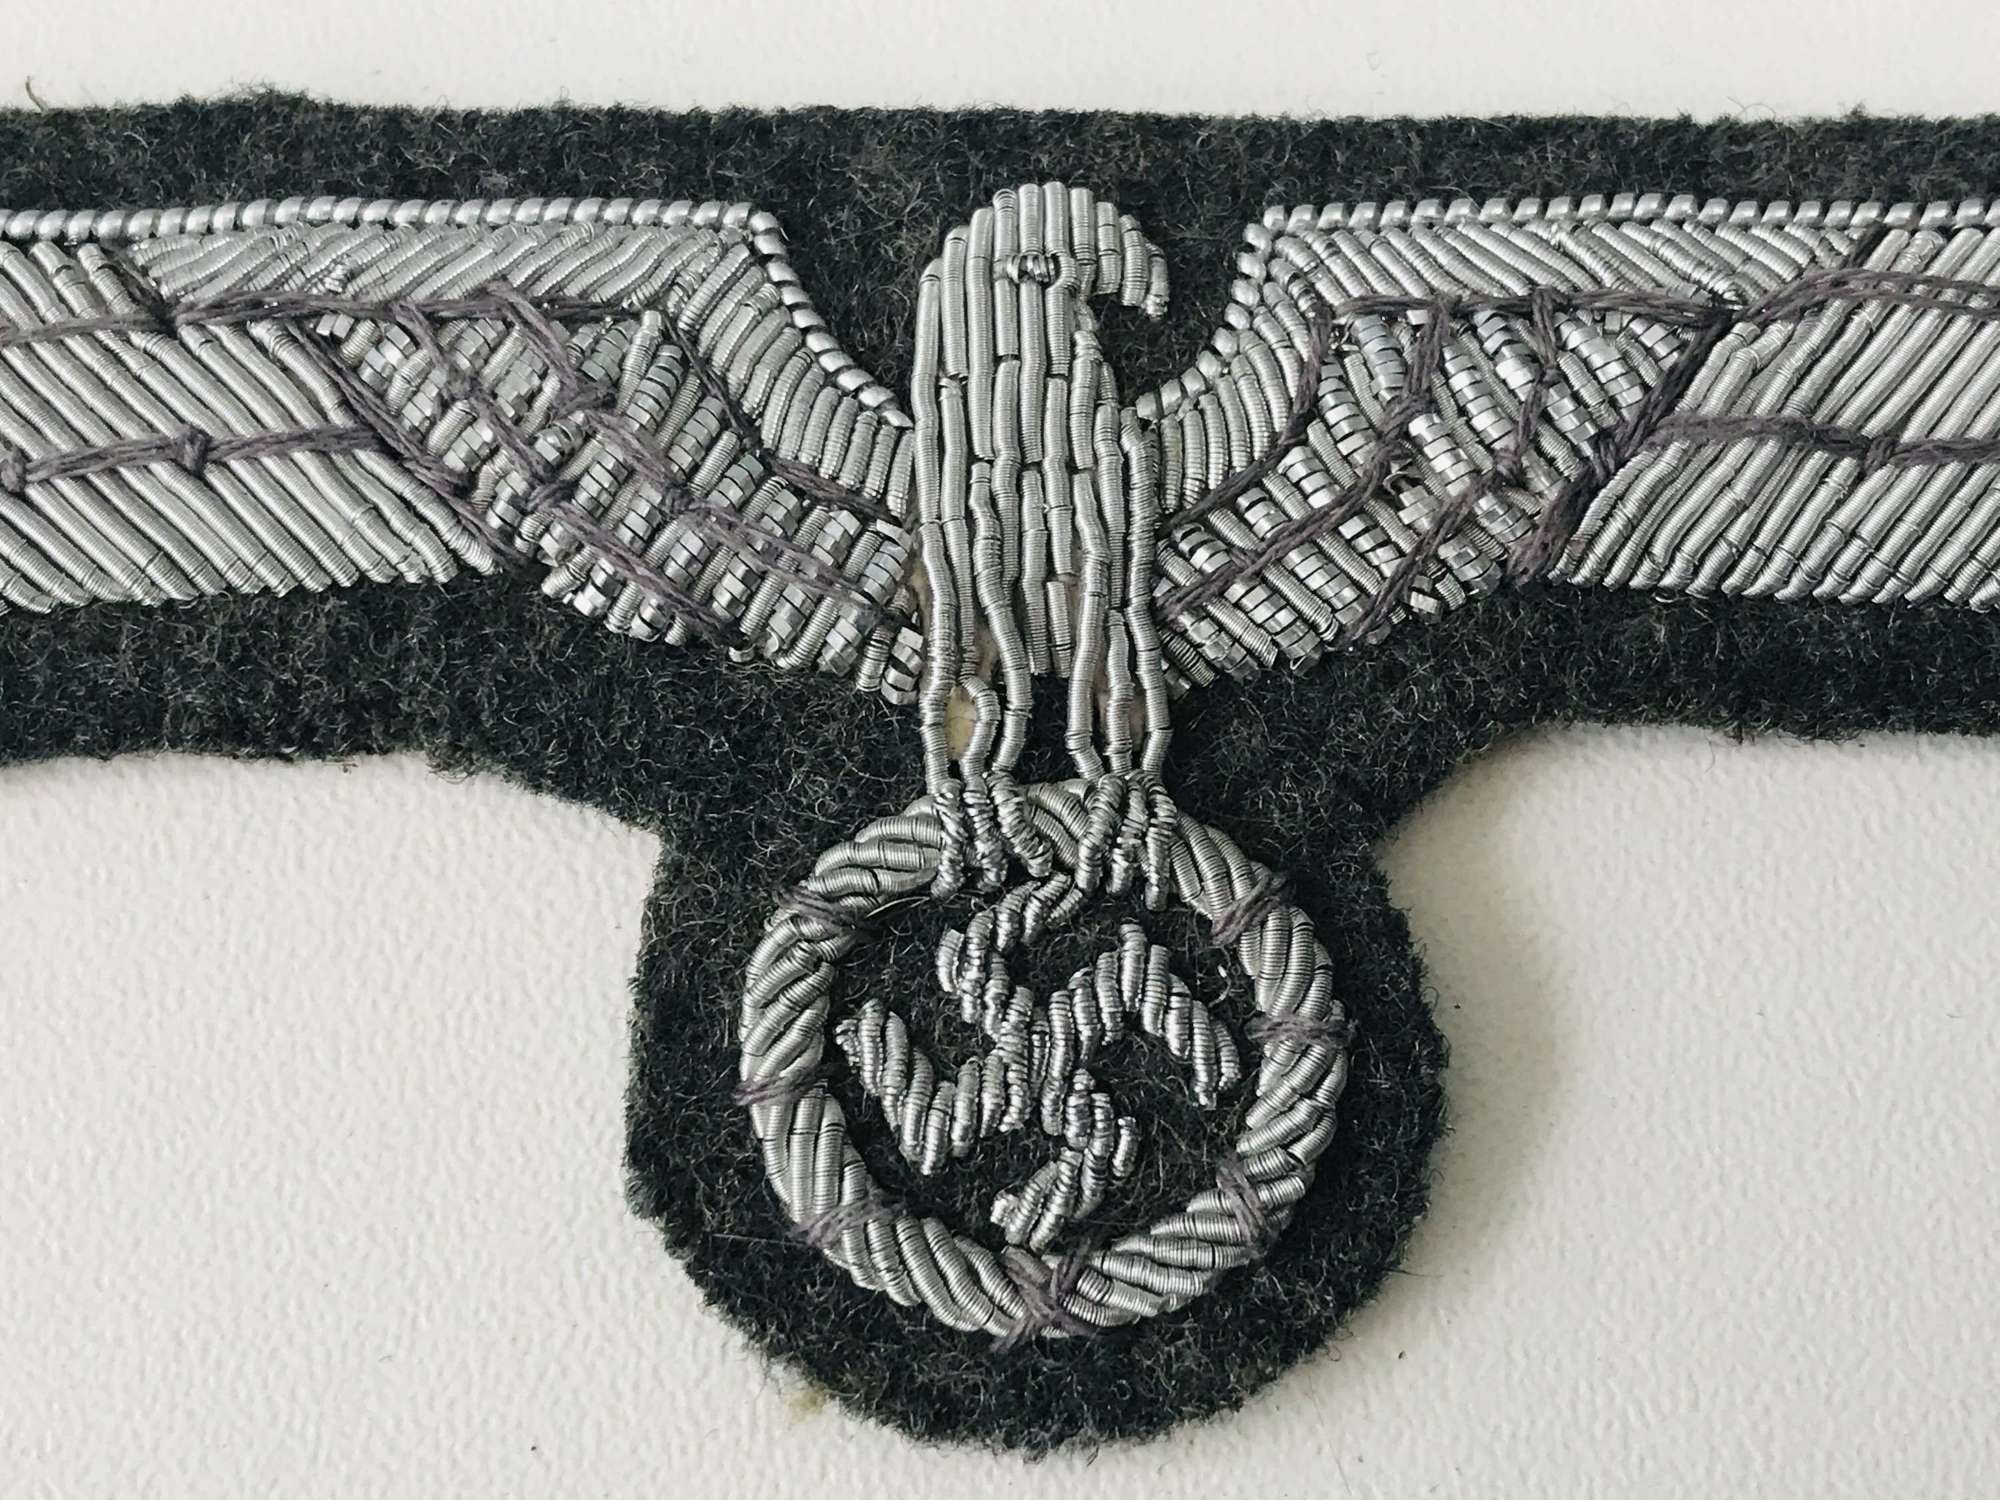 Officers breast Eagle